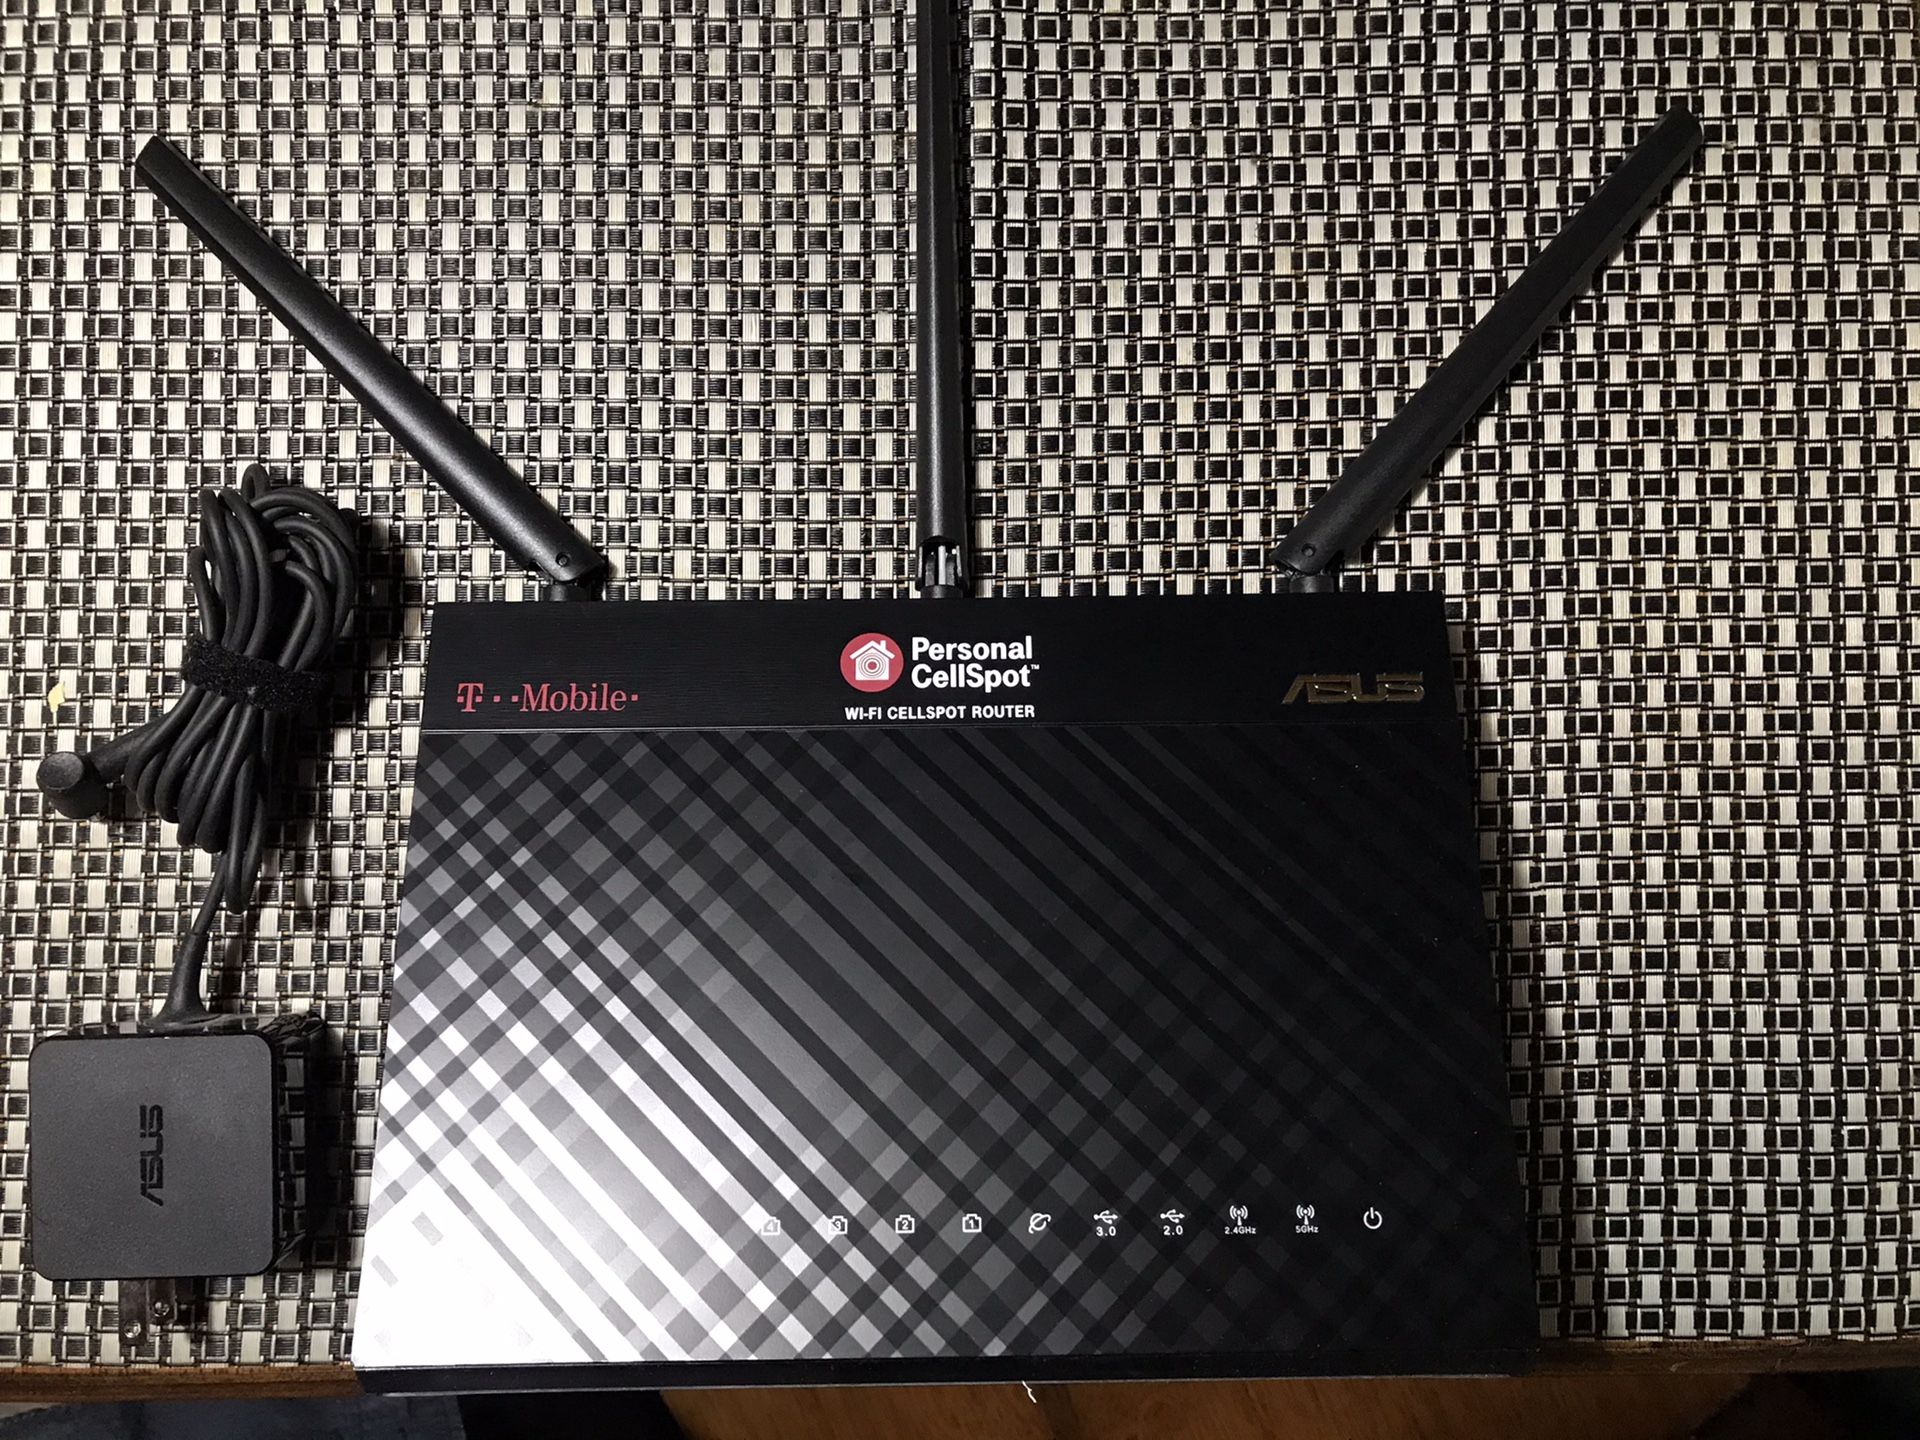 ASUS T-Mobile Cellspot (AC-1900) dual-band wireless router